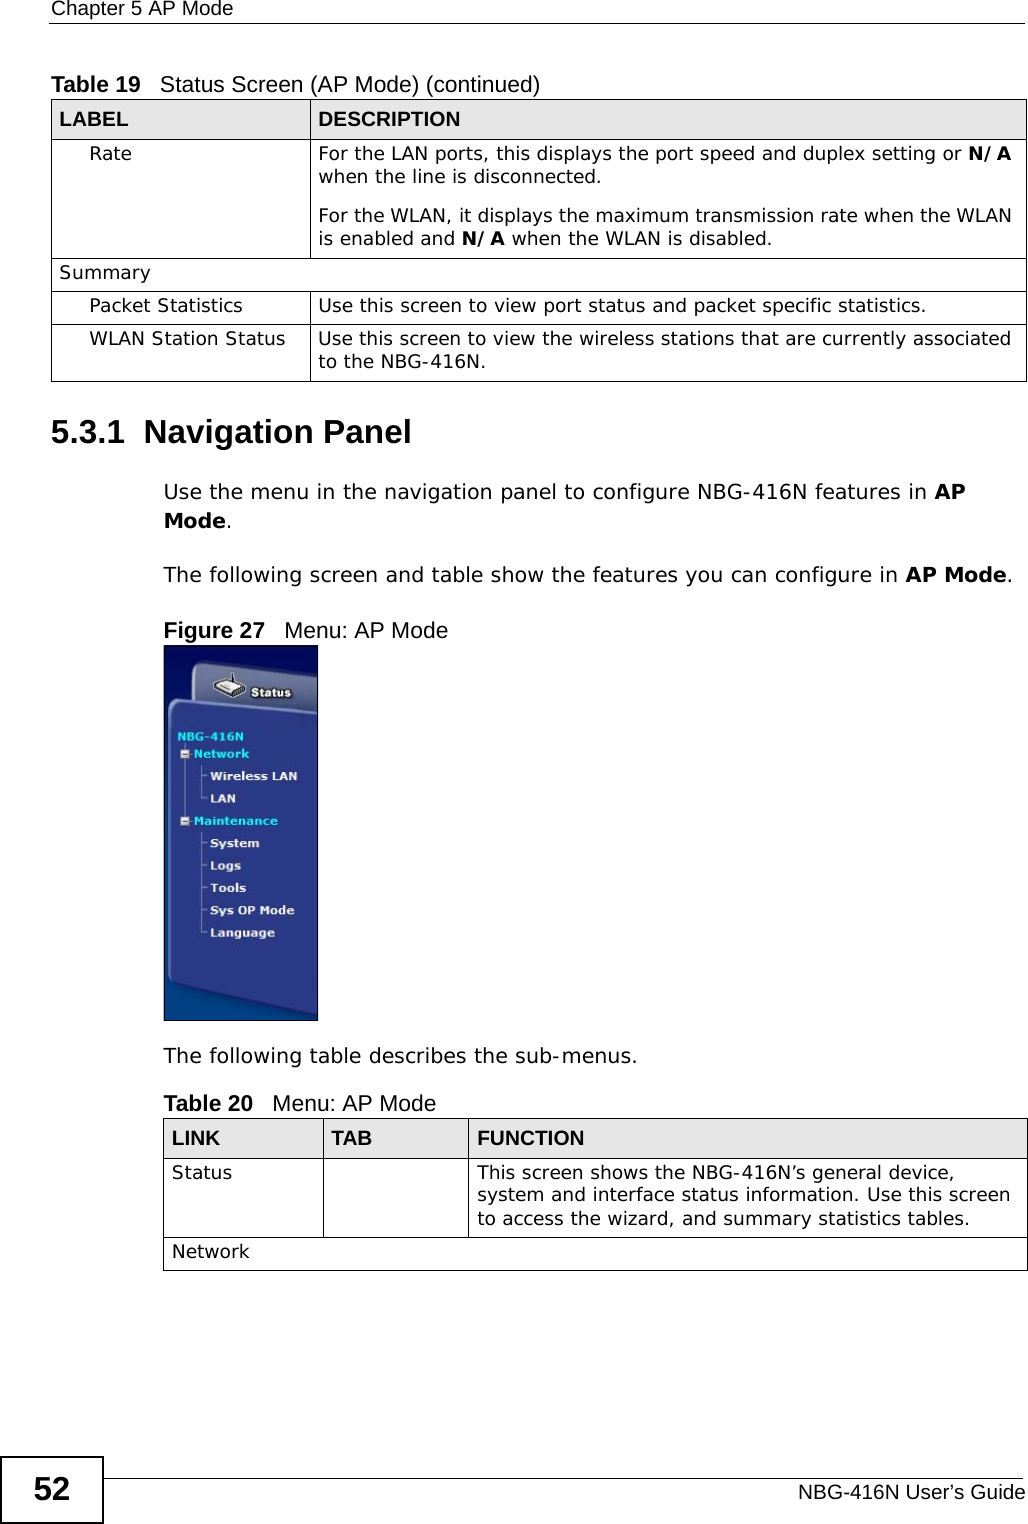 Chapter 5 AP ModeNBG-416N User’s Guide525.3.1  Navigation PanelUse the menu in the navigation panel to configure NBG-416N features in AP Mode.The following screen and table show the features you can configure in AP Mode.Figure 27   Menu: AP ModeThe following table describes the sub-menus.Rate For the LAN ports, this displays the port speed and duplex setting or N/A when the line is disconnected.For the WLAN, it displays the maximum transmission rate when the WLAN is enabled and N/A when the WLAN is disabled.SummaryPacket Statistics Use this screen to view port status and packet specific statistics.WLAN Station Status Use this screen to view the wireless stations that are currently associated to the NBG-416N.Table 19   Status Screen (AP Mode) (continued)LABEL DESCRIPTIONTable 20   Menu: AP ModeLINK TAB FUNCTIONStatus This screen shows the NBG-416N’s general device, system and interface status information. Use this screen to access the wizard, and summary statistics tables.Network